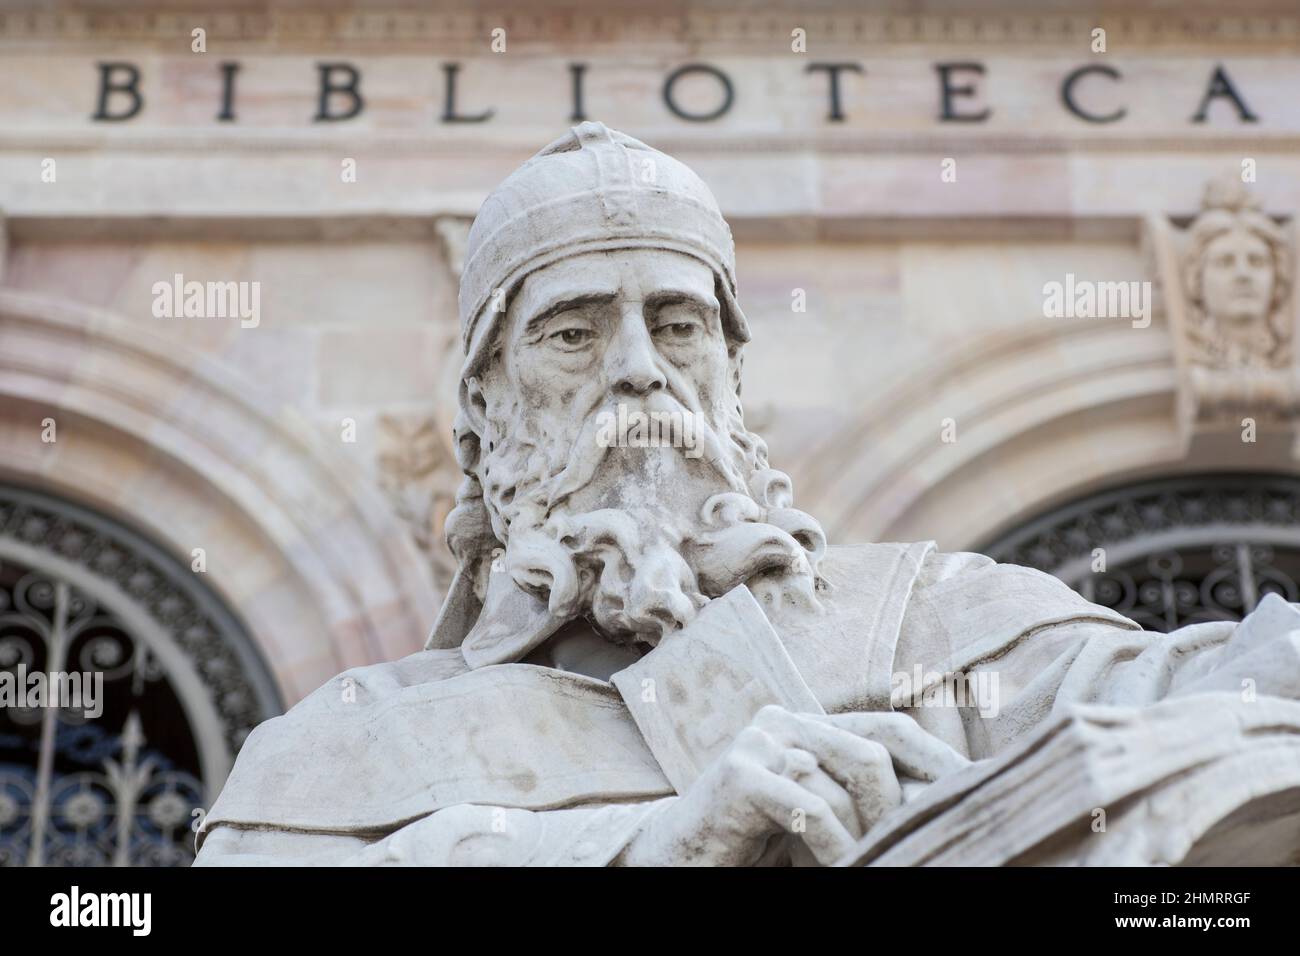 Madrid, Spain - March 6th, 2021: Isidore of Seville statue at National Library of Spain, Madrid. Medieval Spanish scholar Stock Photo